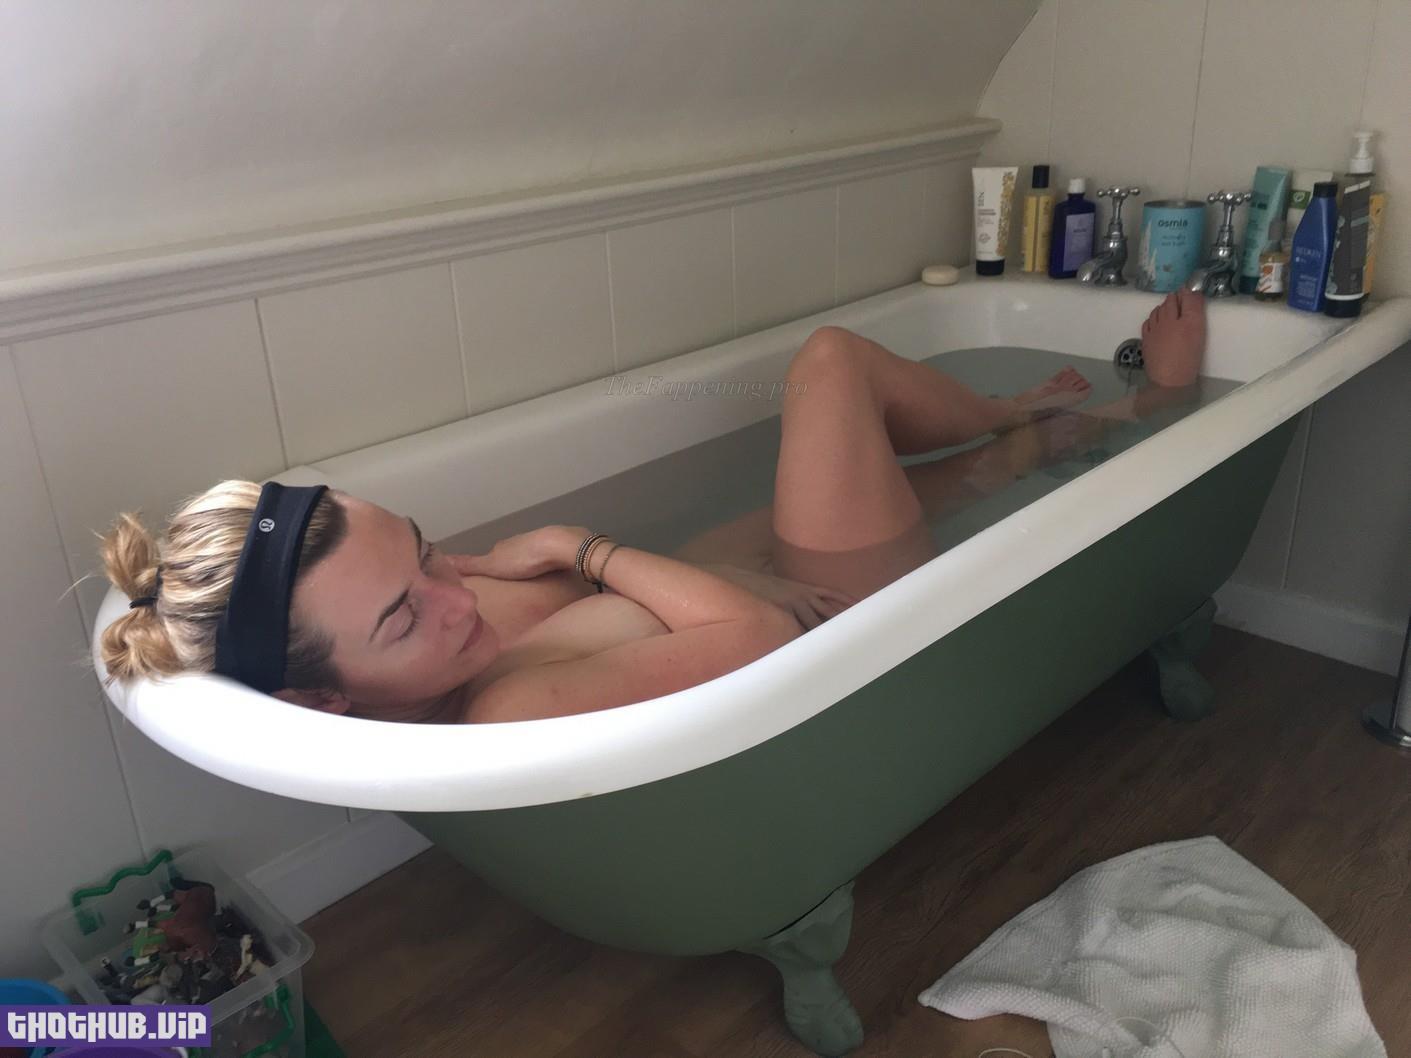 Kate Winslet nude photos leaked from hacked iCloud